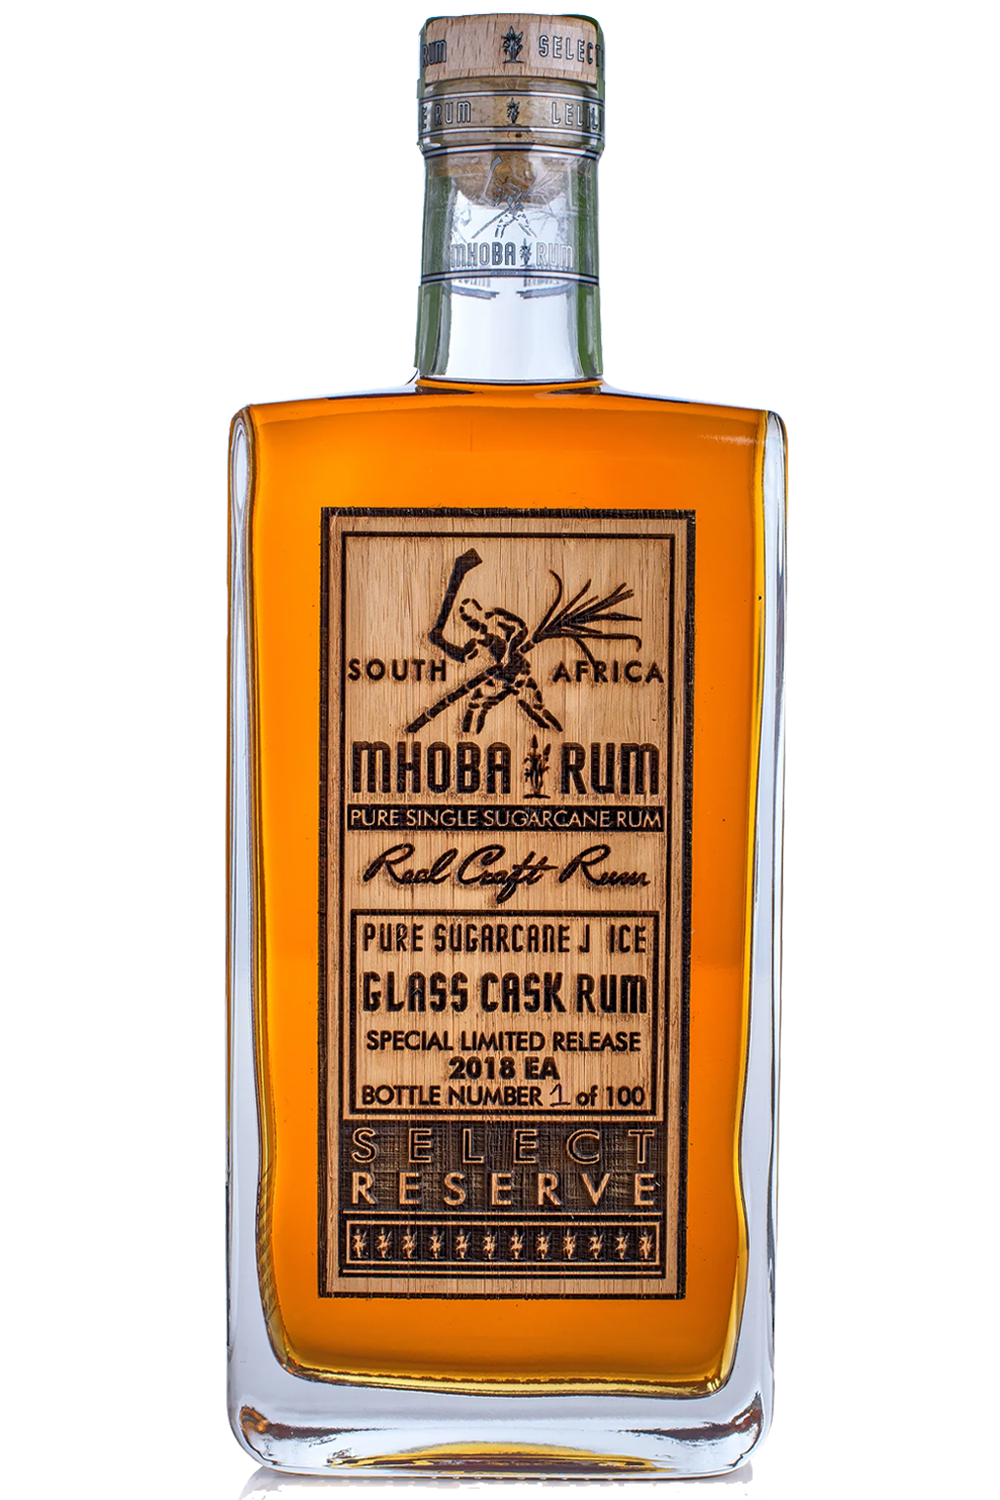 WineVins Mhoba Select Reserve Glass Cask